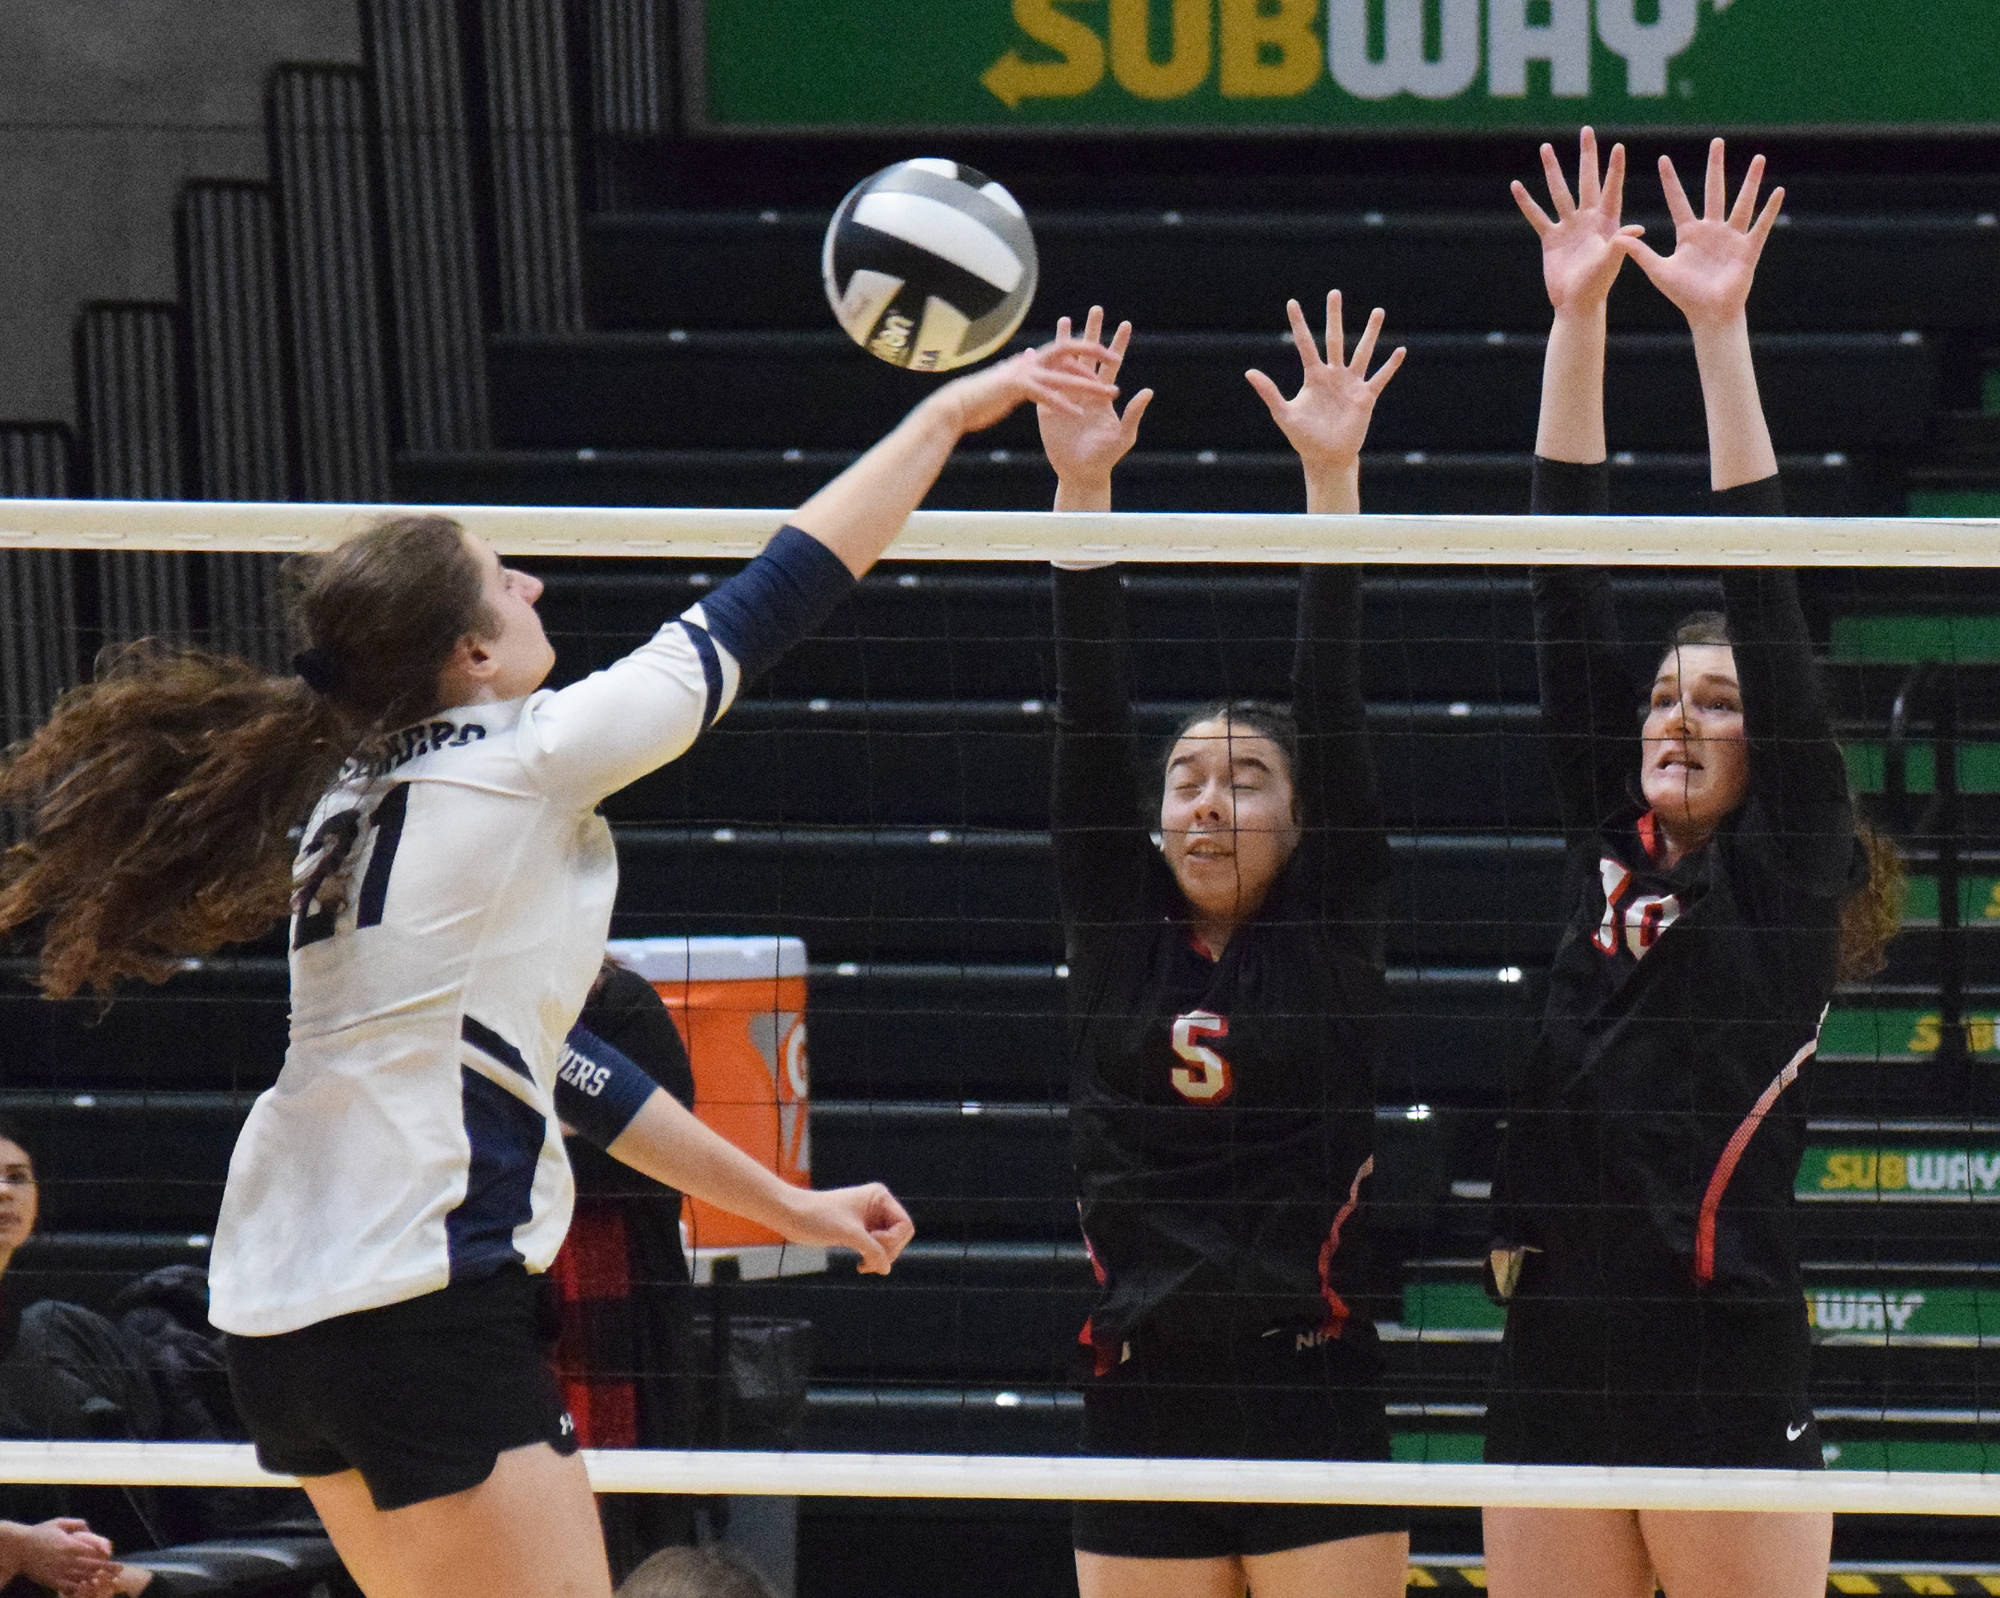 Kenai’s Chelsea Plagge (left) and Abby Every team up for a block on Homer’s Marina Carroll, Saturday, Nov. 16, 2019, at the Class 3A state volleyball tournament at the Alaska Airlines Center in Anchorage, Alaska. (Photo by Joey Klecka/Peninsula Clarion)